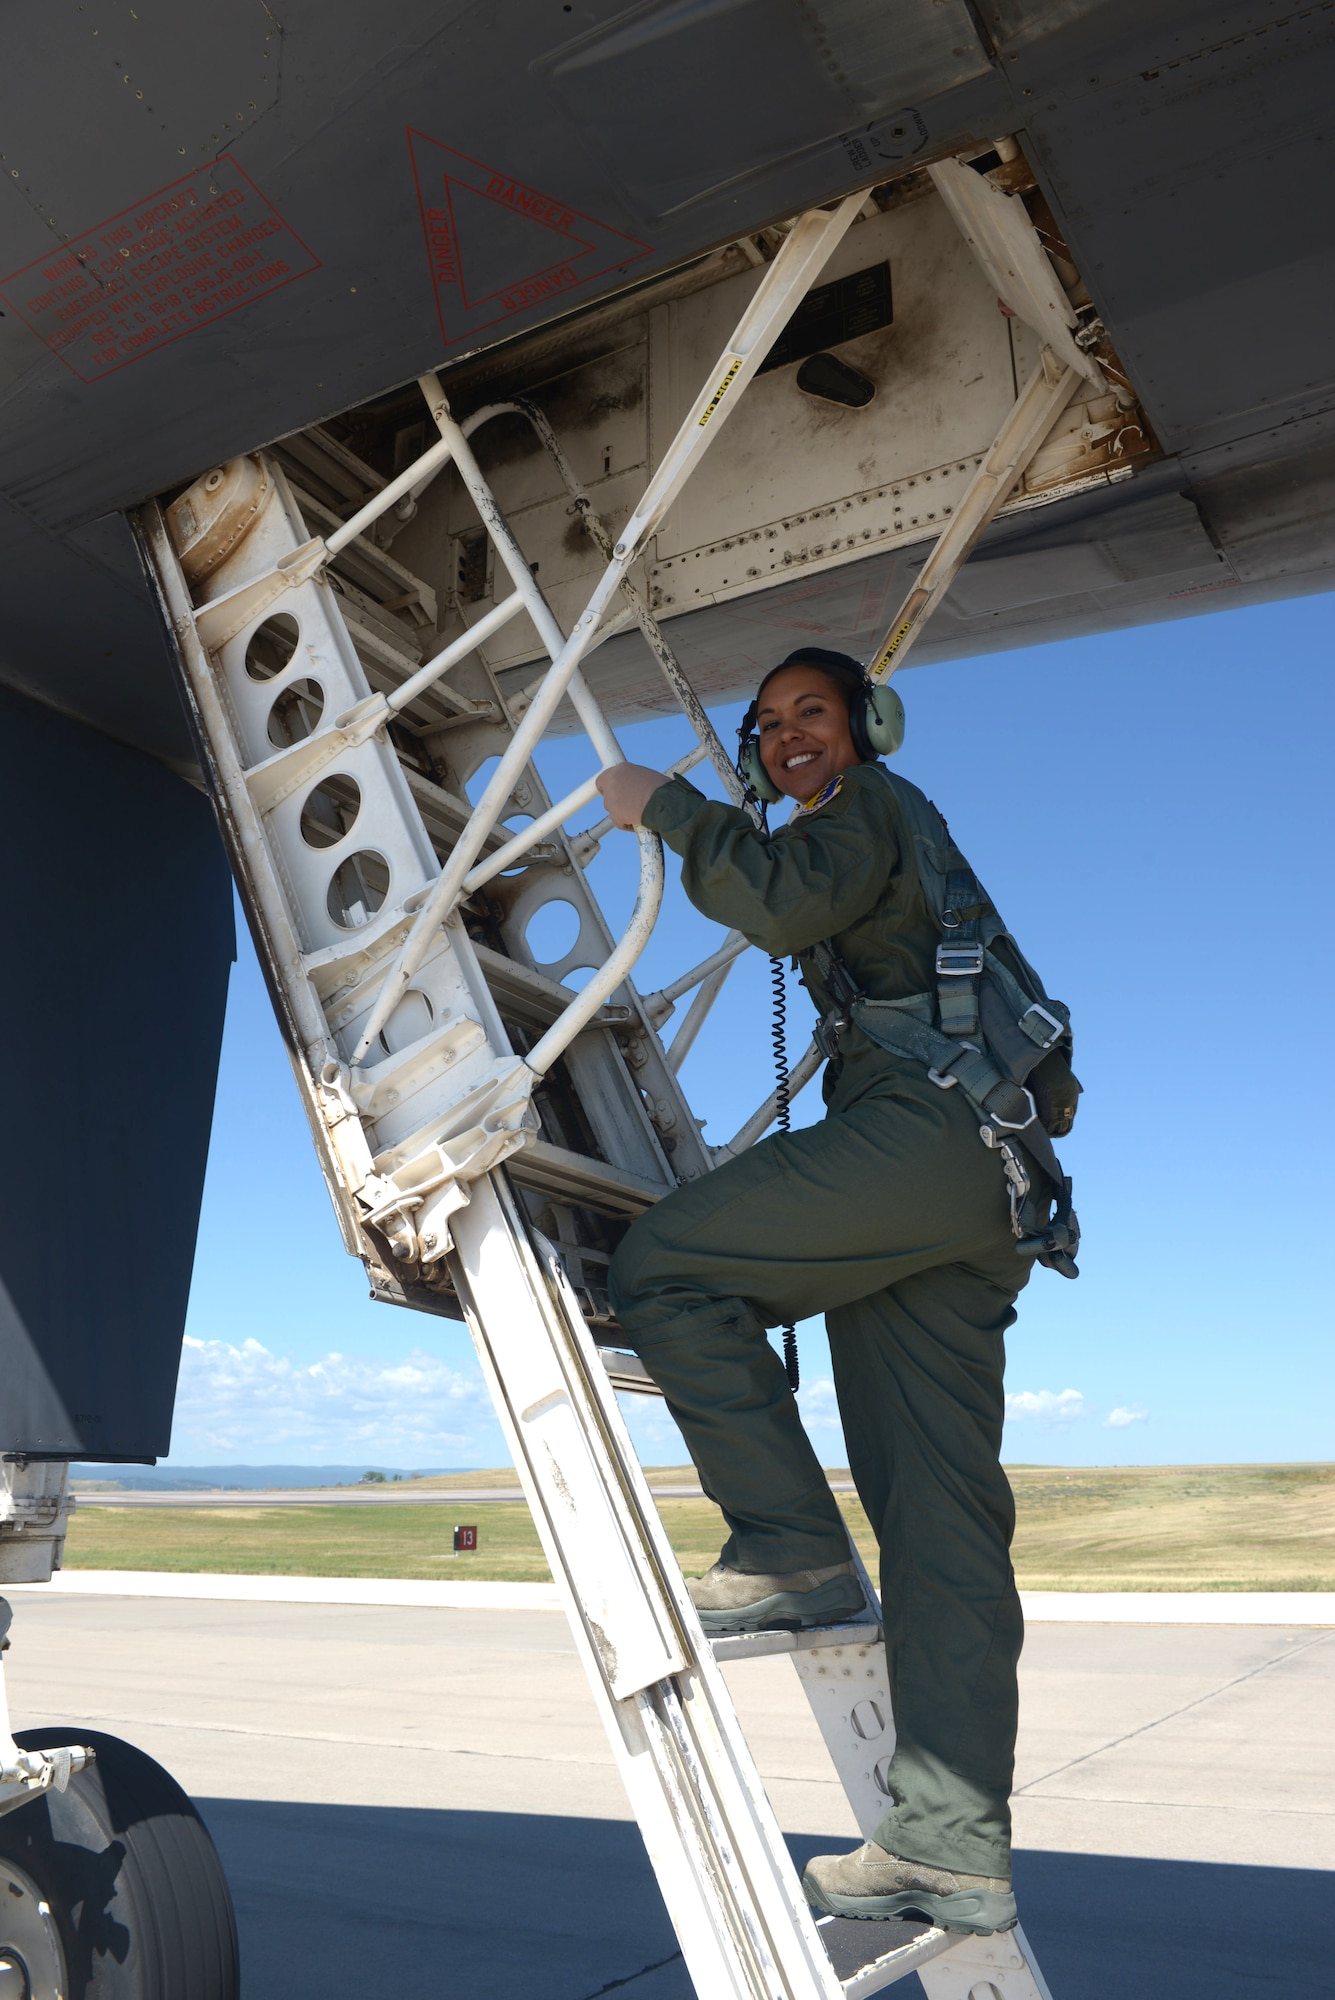 Chief Master Sgt. Sonia Lee, the command chief of the 28th Bomb Wing, prepares for an incentive flight at Ellsworth Air Force Base, S.D., July 15, 2016. Lee attended the flight to experience the B-1 bomber, the primary aircraft of the wing, and its mission firsthand. (U.S. Air Force photo by Airman Donald Knechtel) 